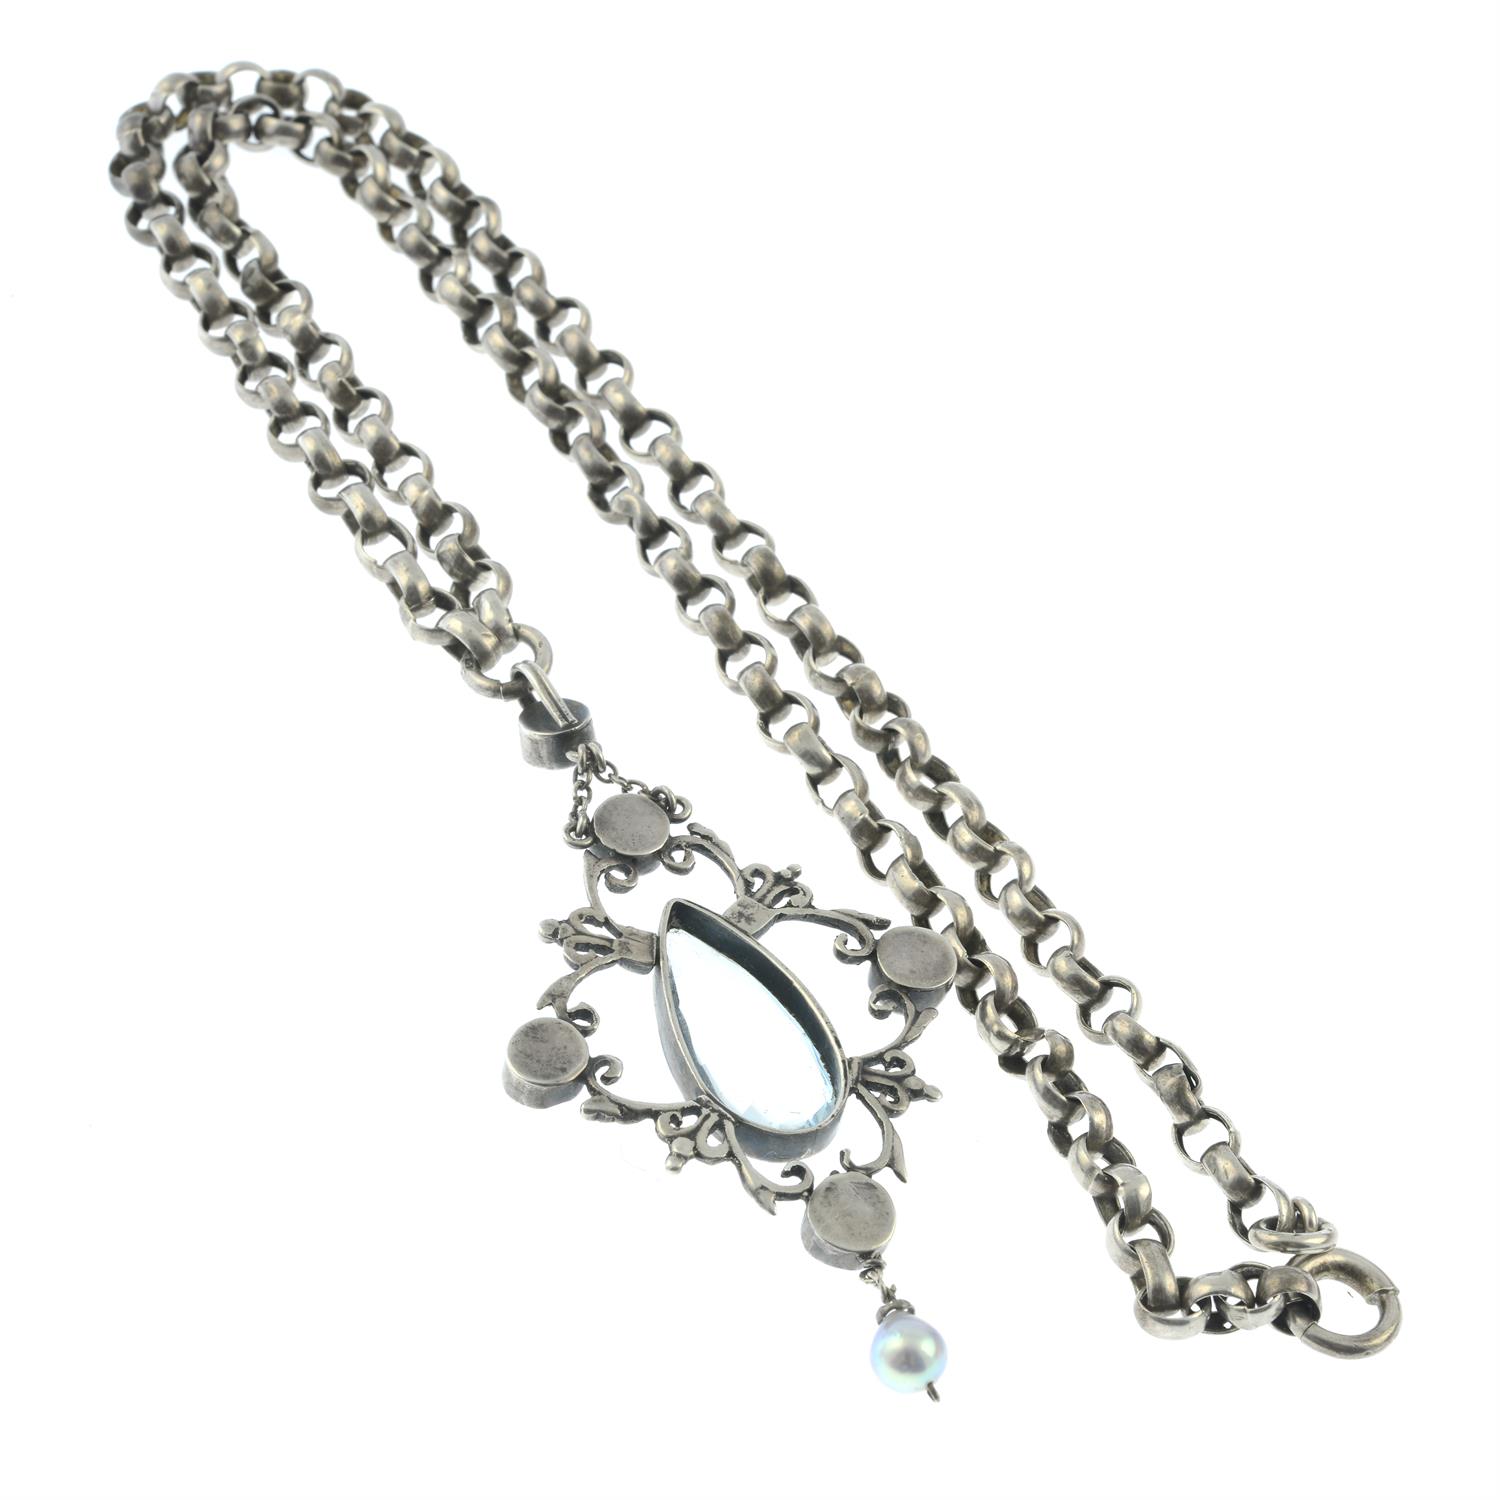 Edwardian silver split pearl, mother-of-pearl & aquamarine pendant necklace - Image 2 of 2